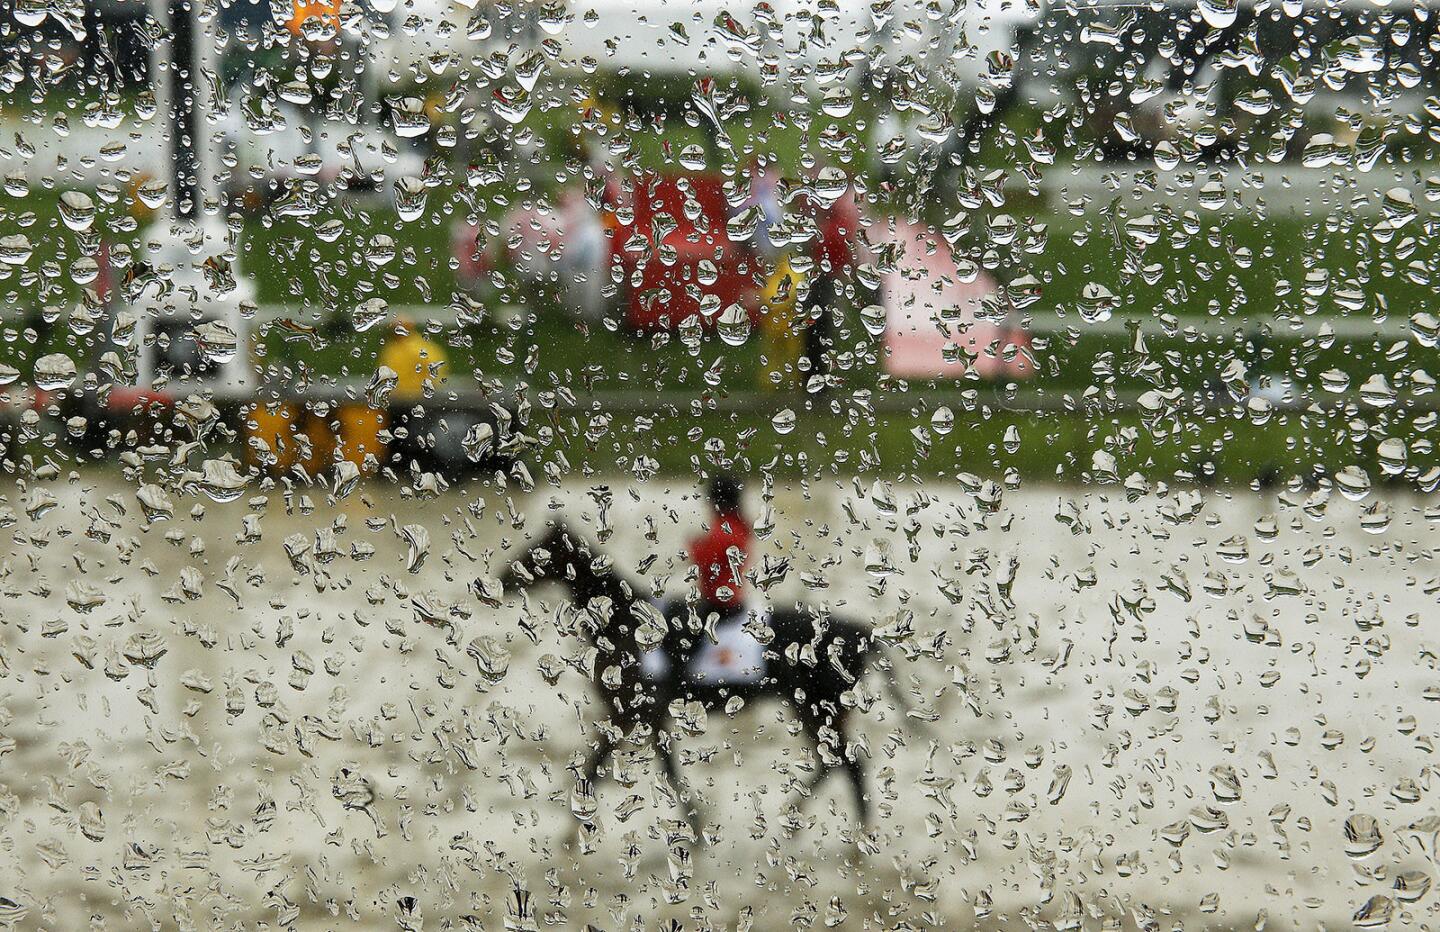 A horse moves along a muddy track during a rainy Saturday before the running of the 141st Preakness Stakes at Pimlico Race Course in Baltimore.